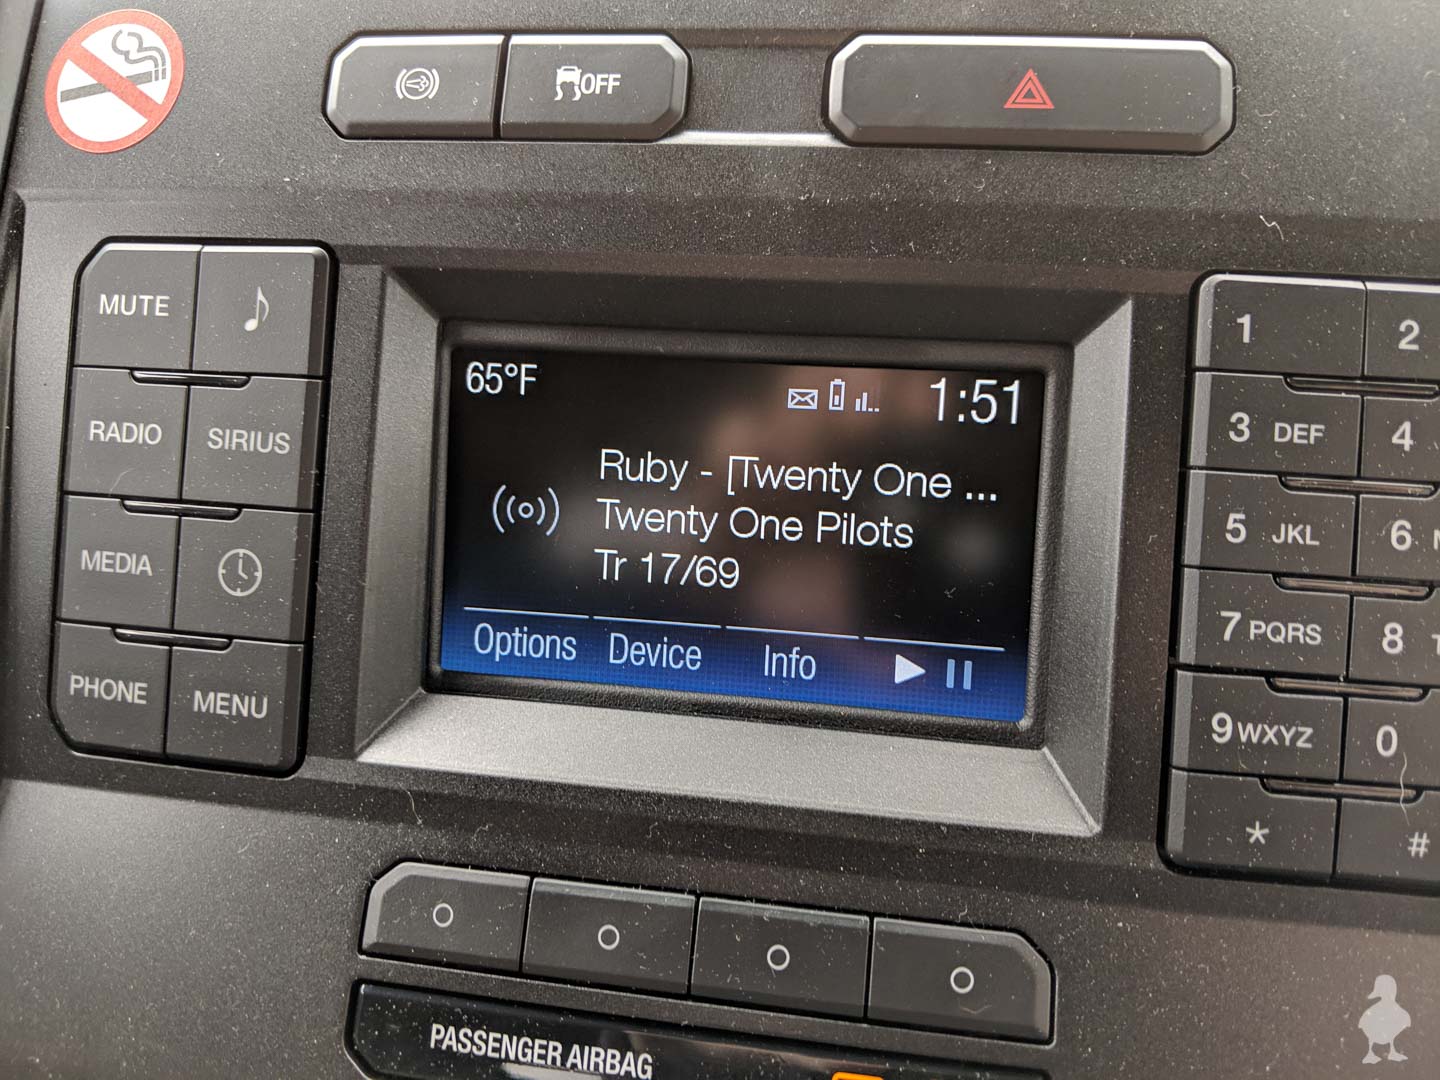 Ruby came on the radio as a good sign for our trip